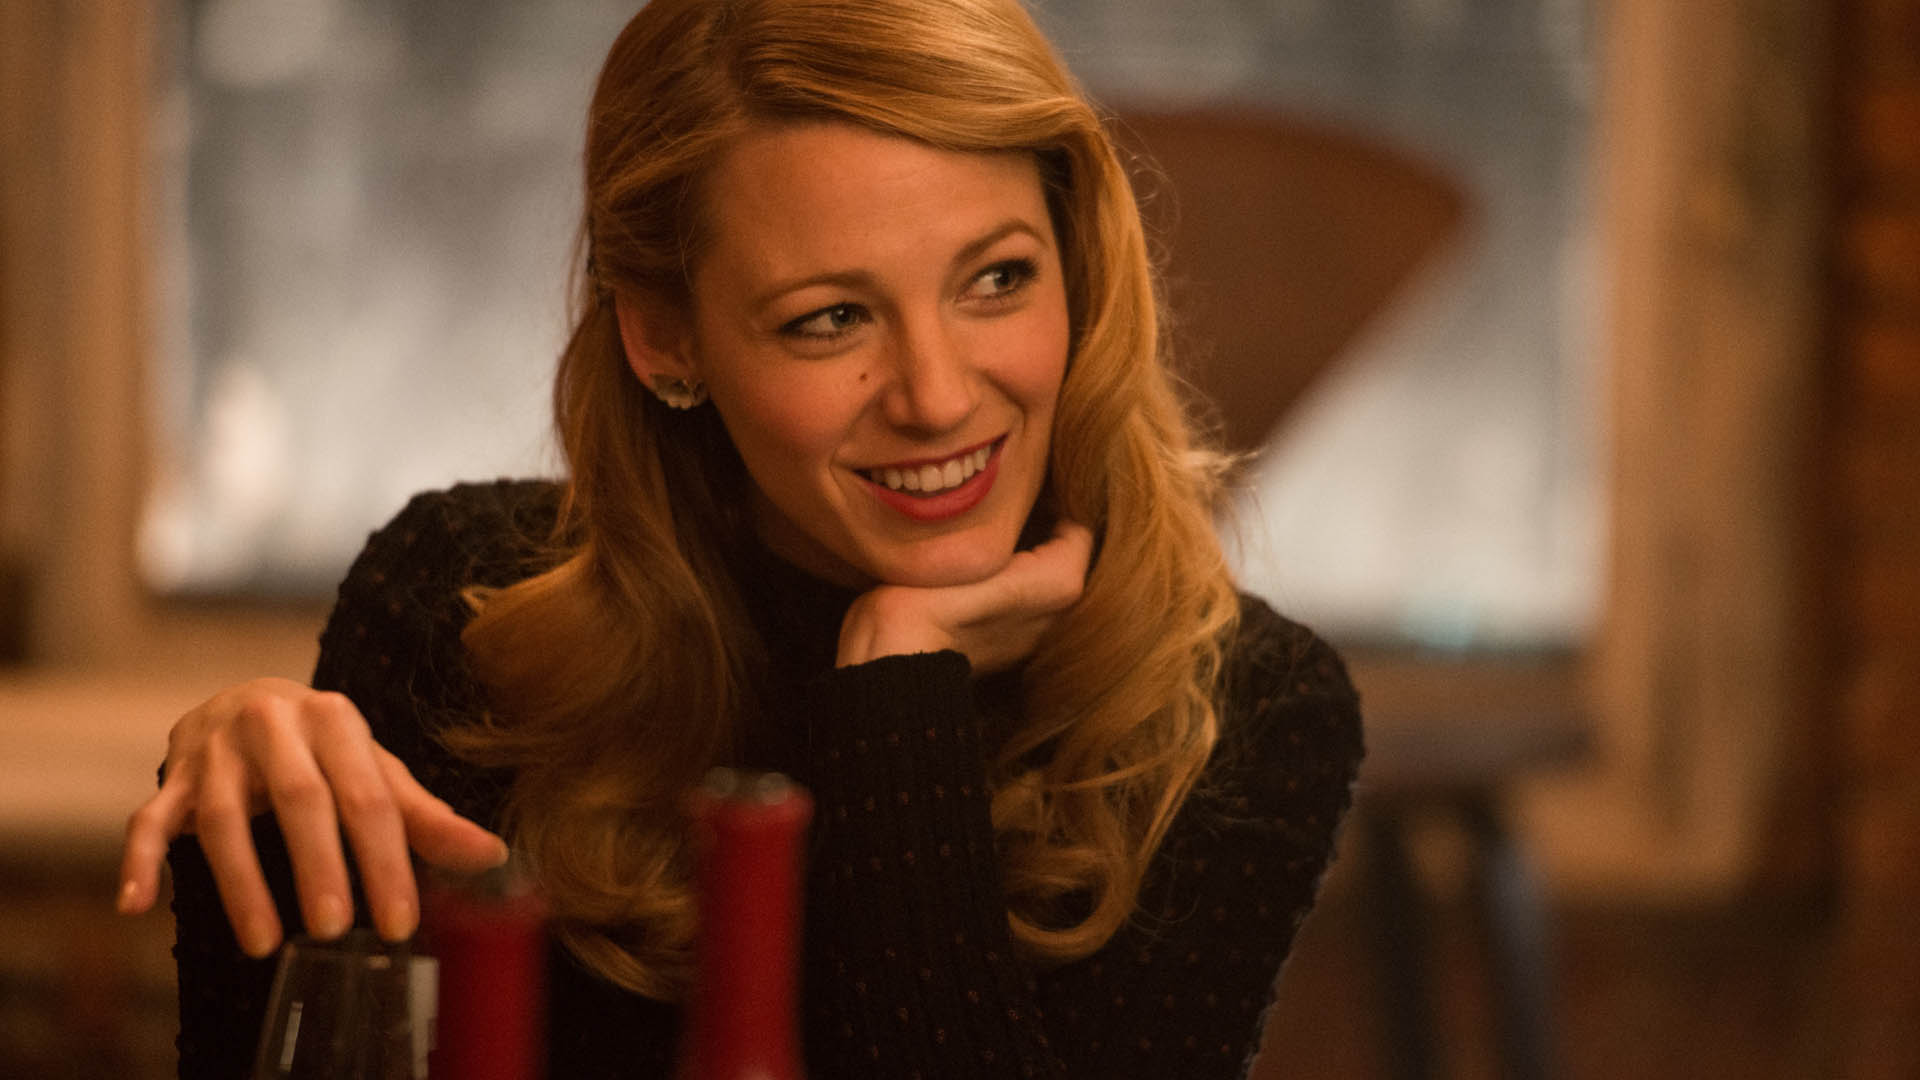 The character of Adaline laughing in the movie The Age of Adaline